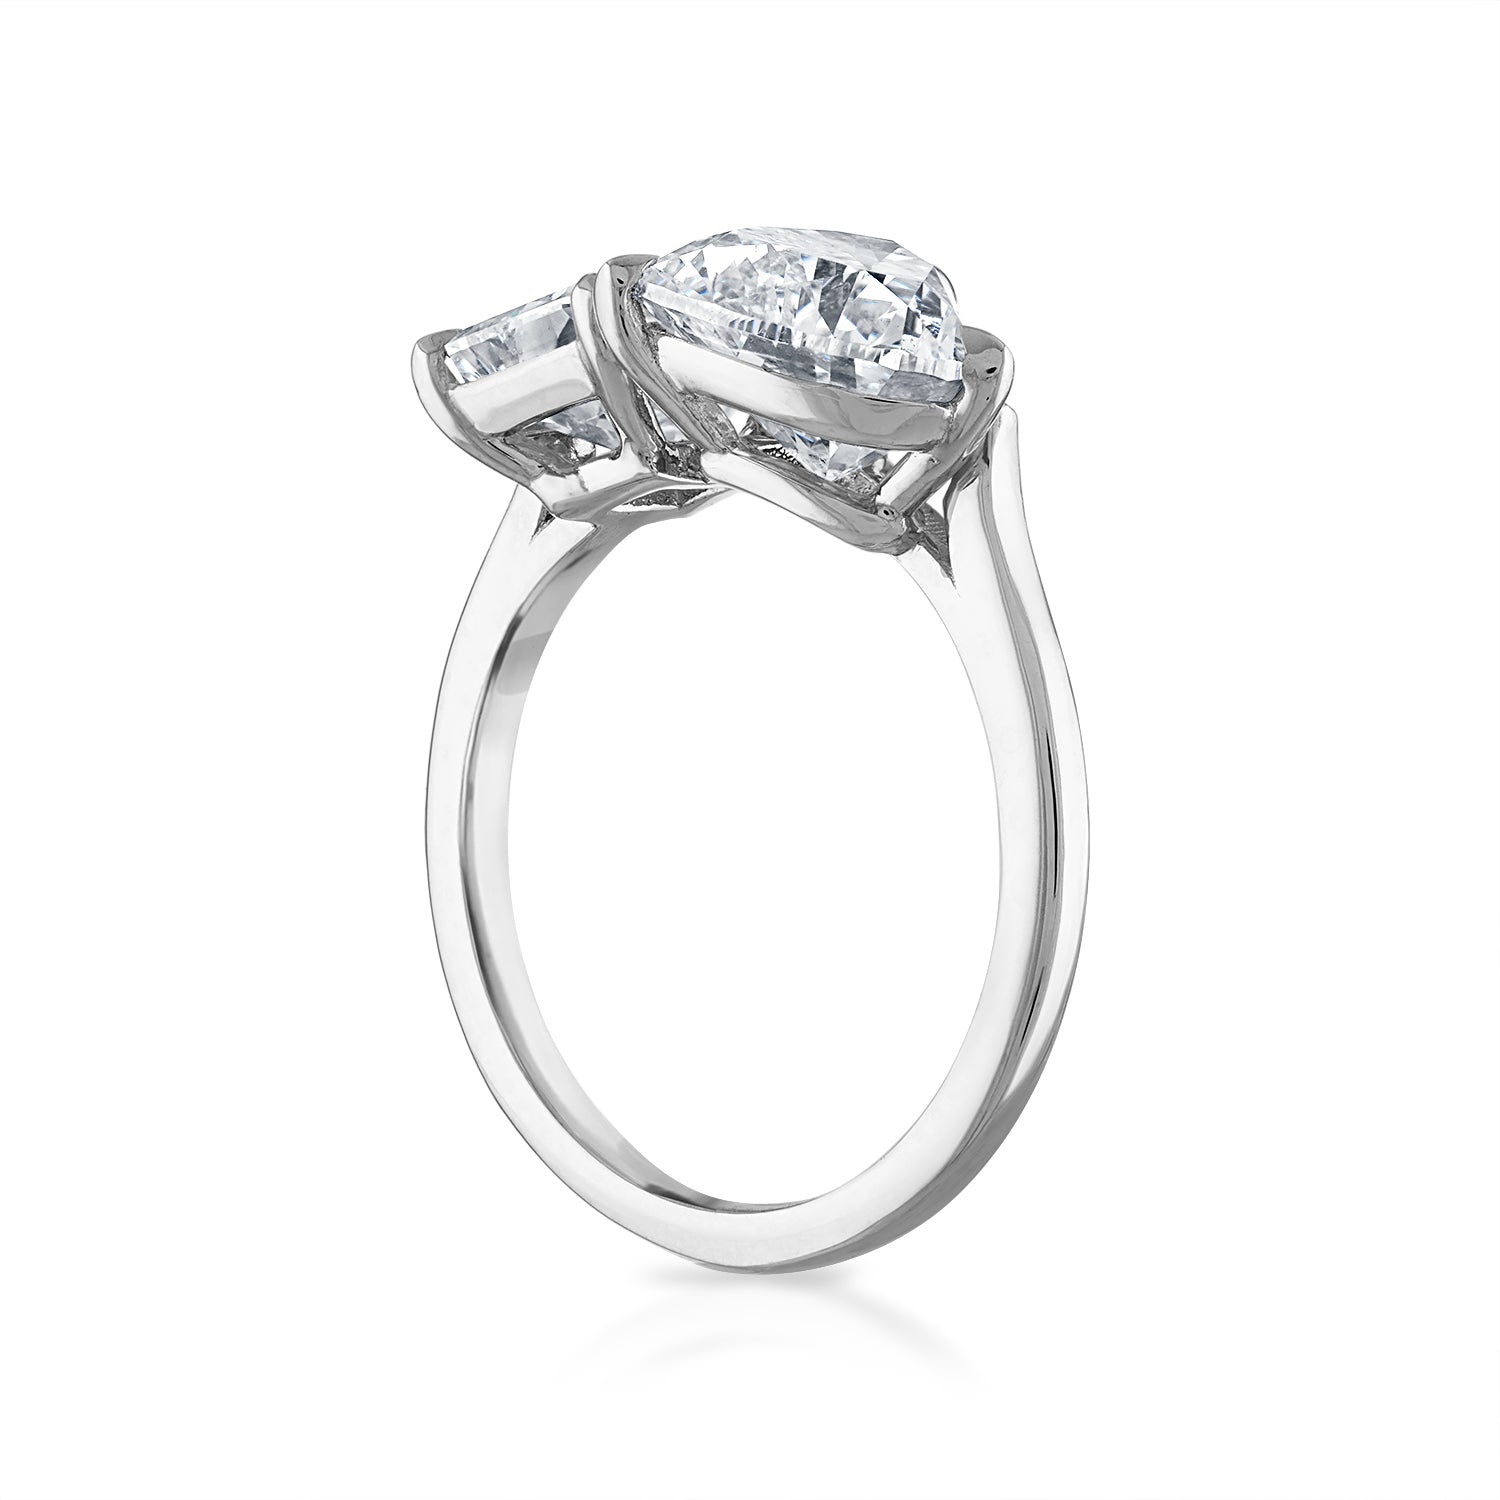 4.58cttw Heart Shaped and Radiant Cut Two-Stone Engagement Ring